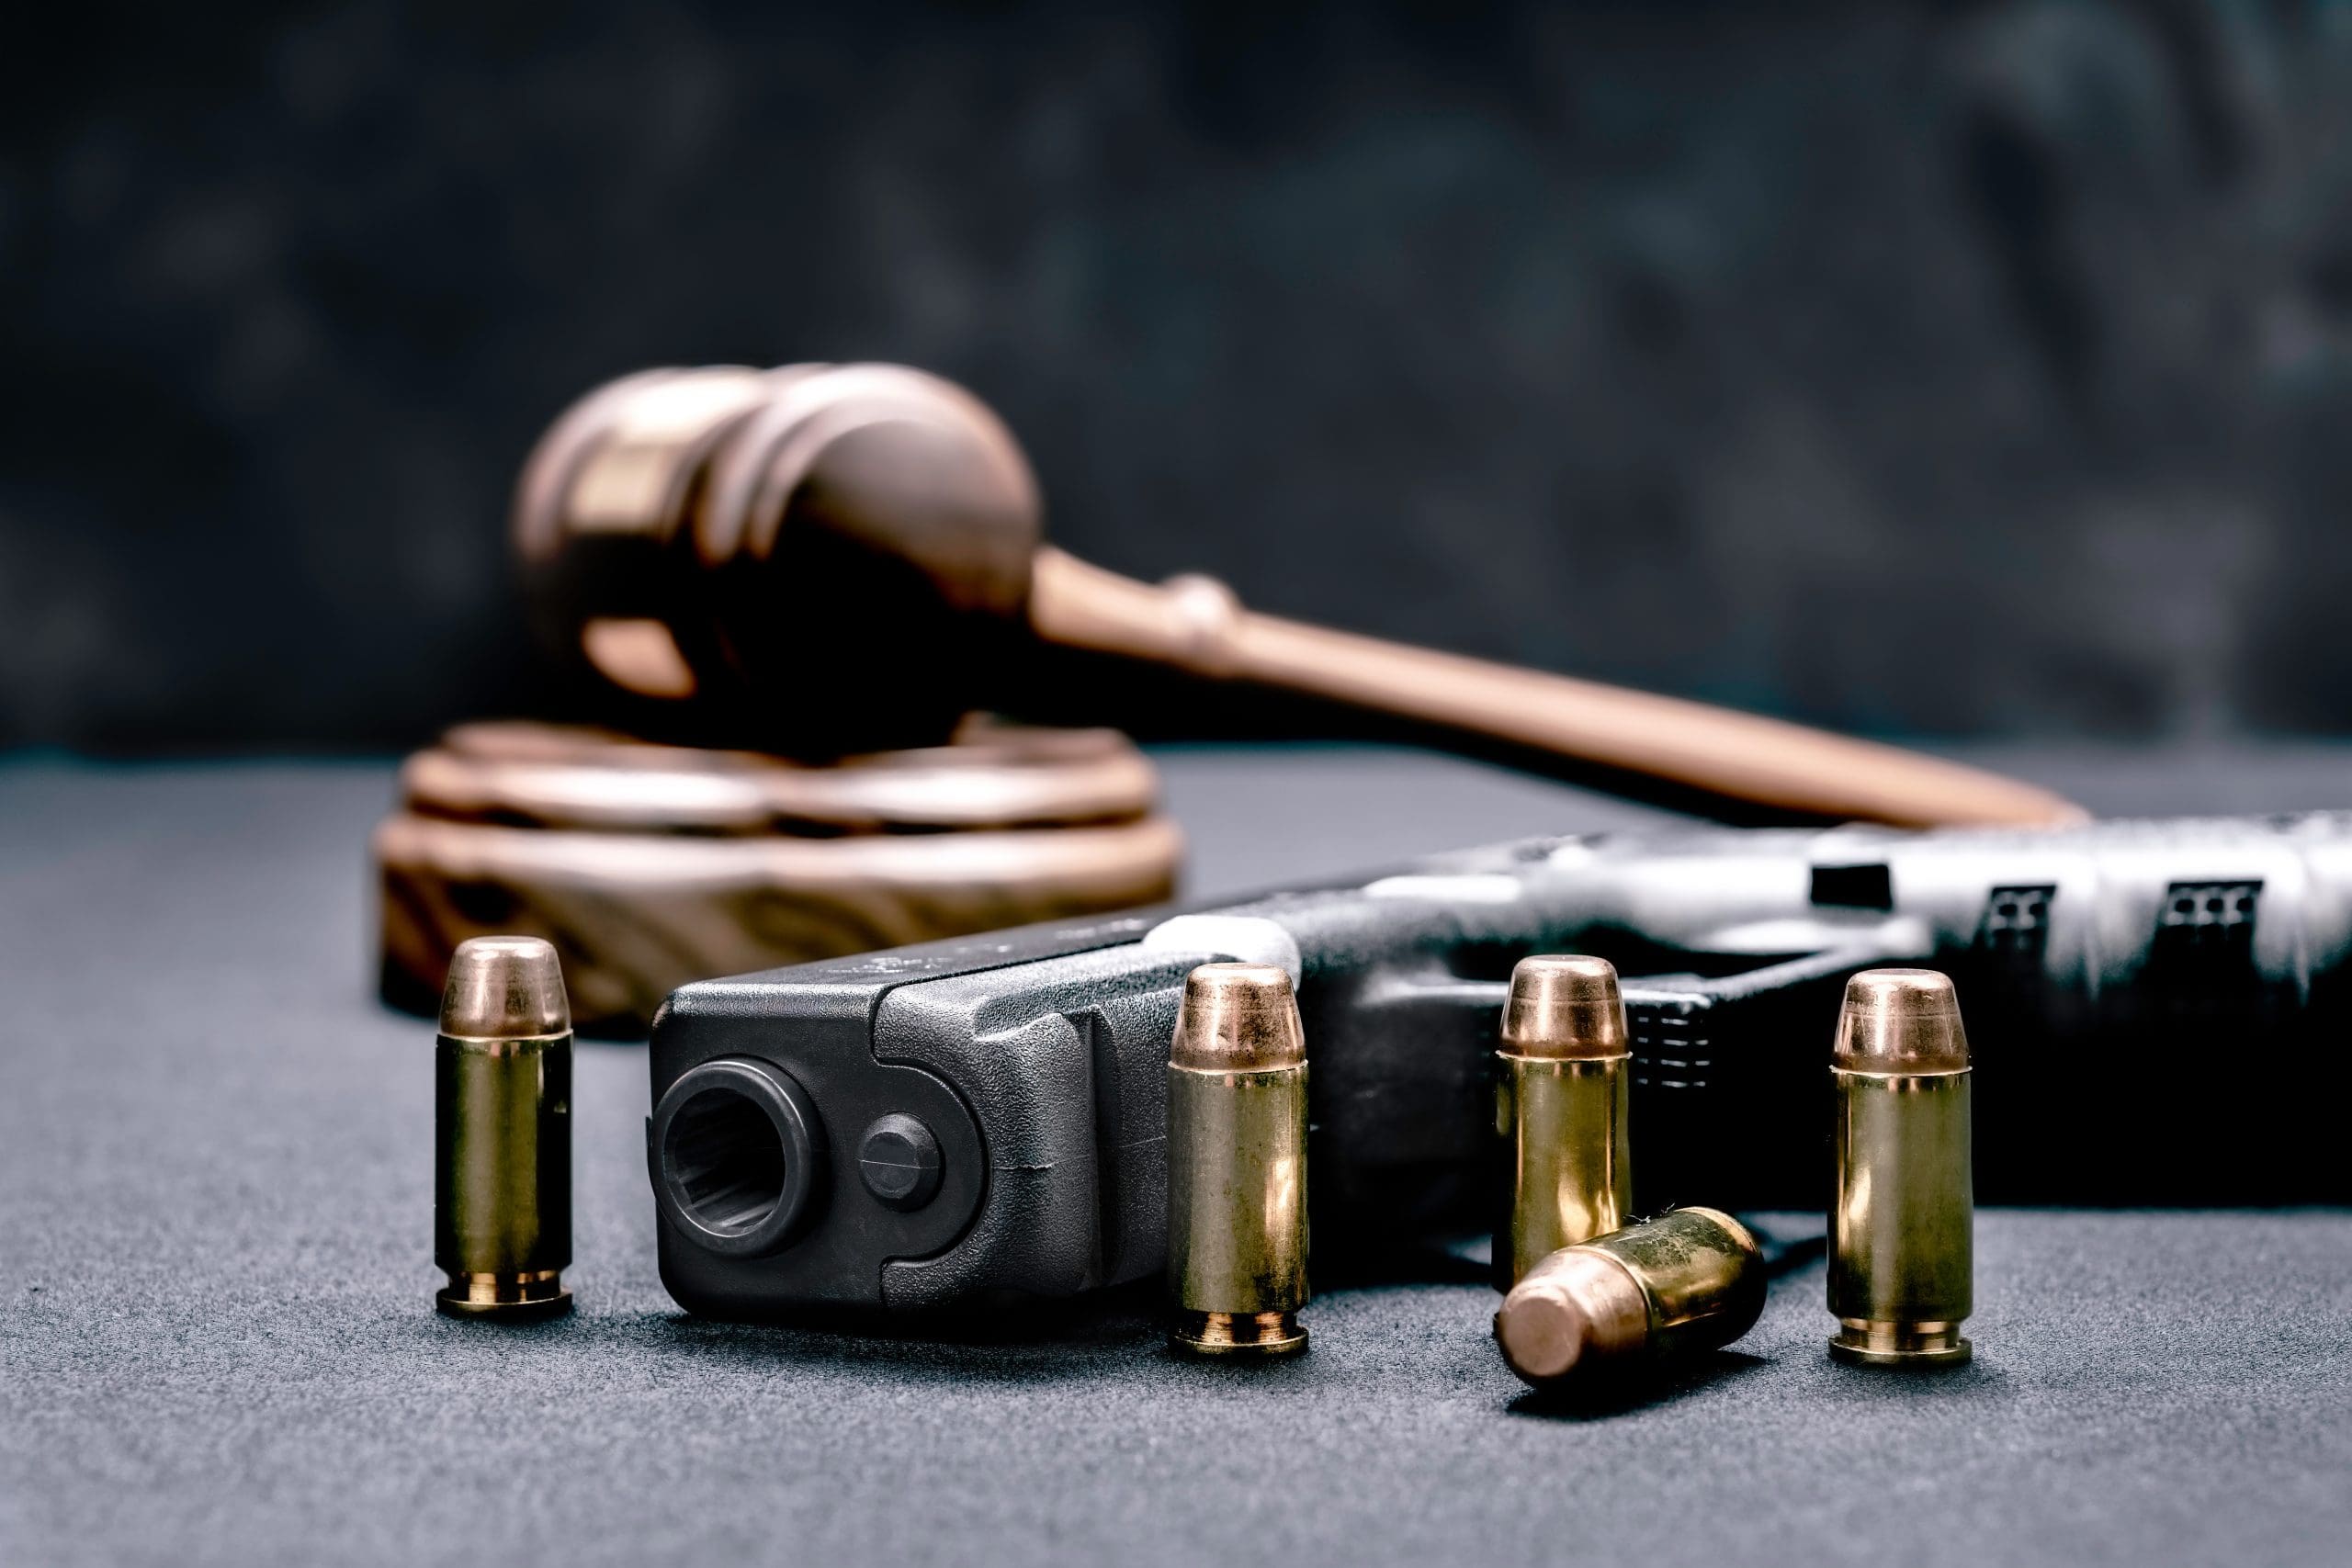 A gun and bullets on a table with a judge's gavel.